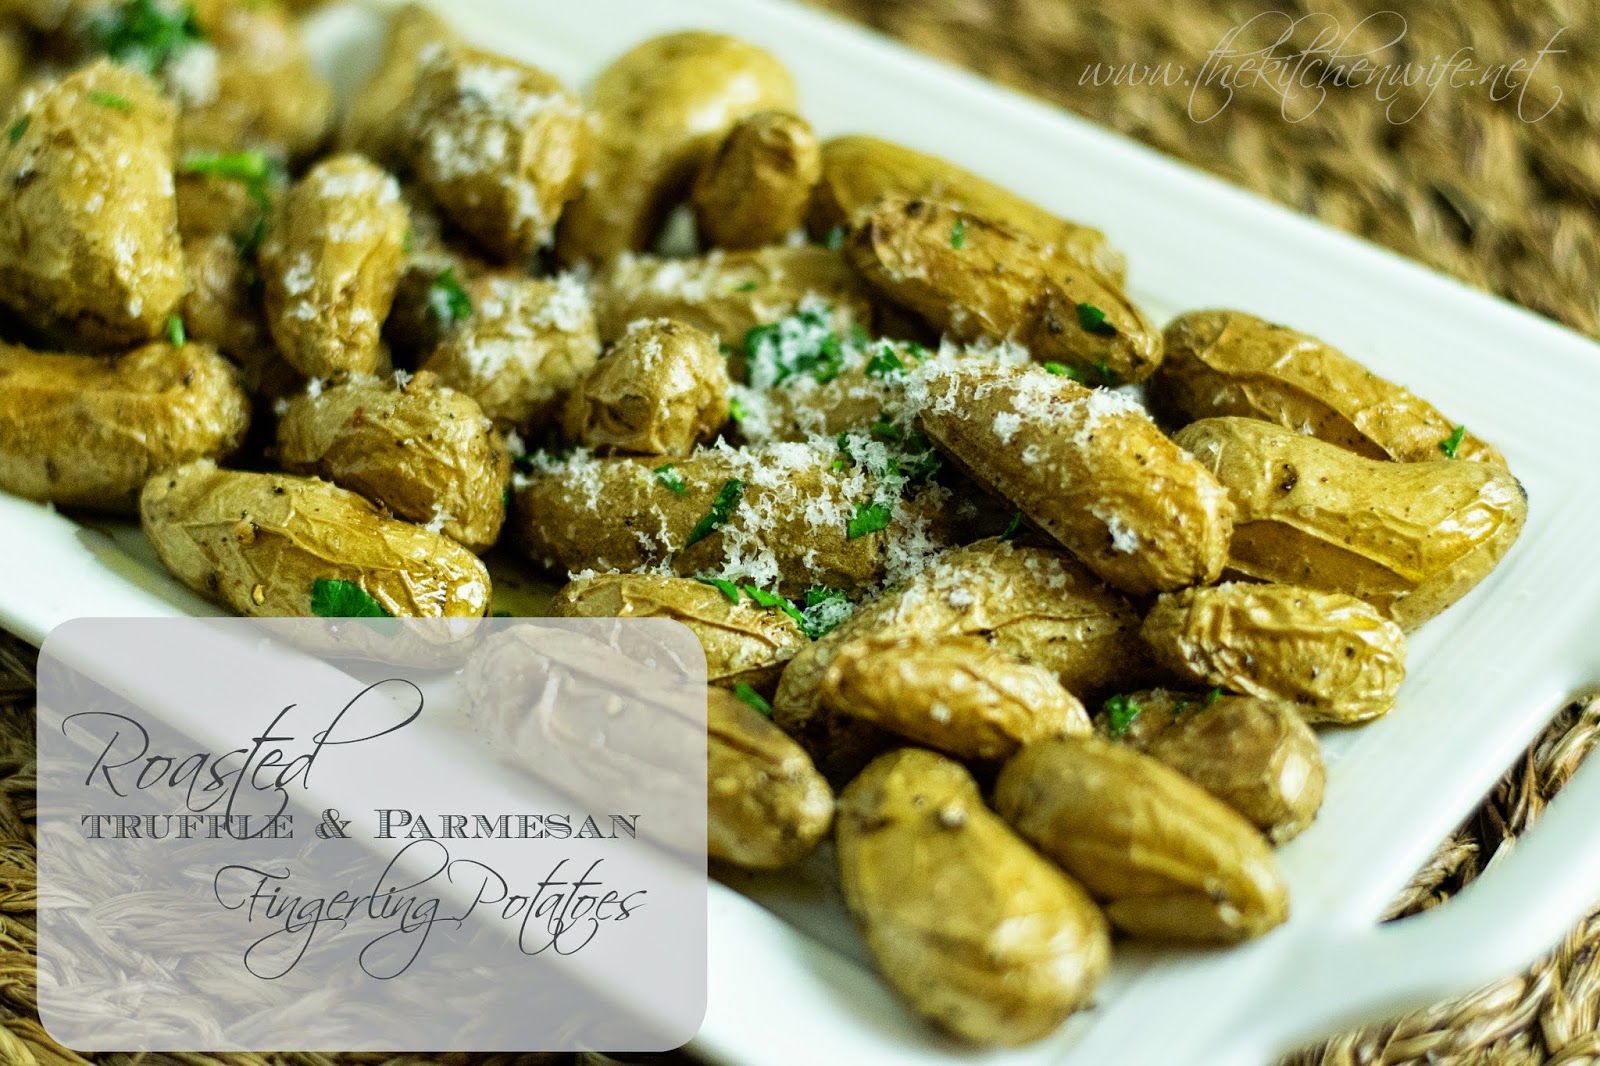 Roasted Truffle and Parmesan Fingerling Potatoes